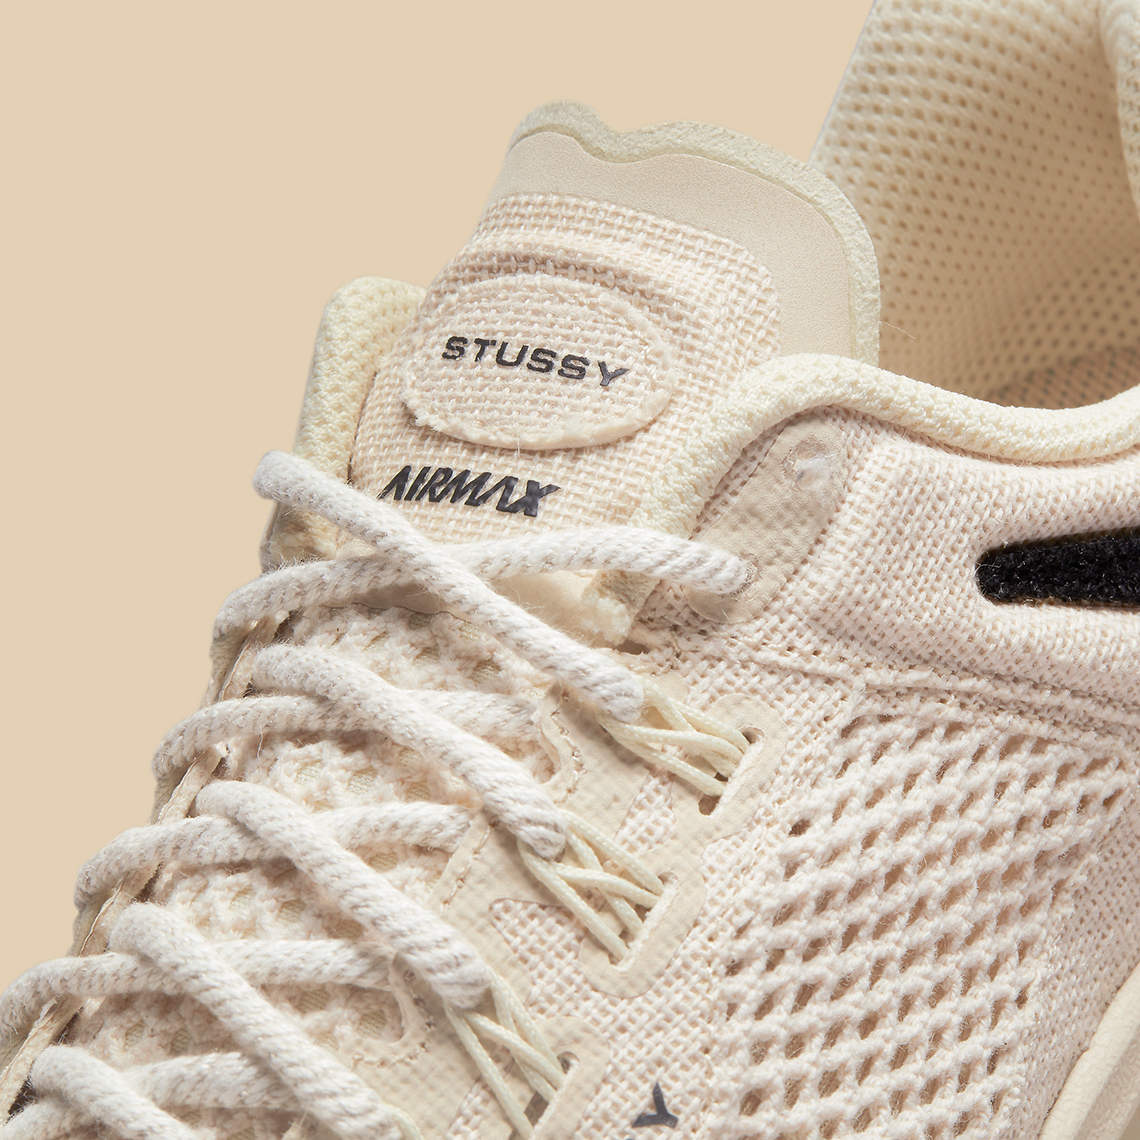 stussy nike air max 2013 fossil release date 6